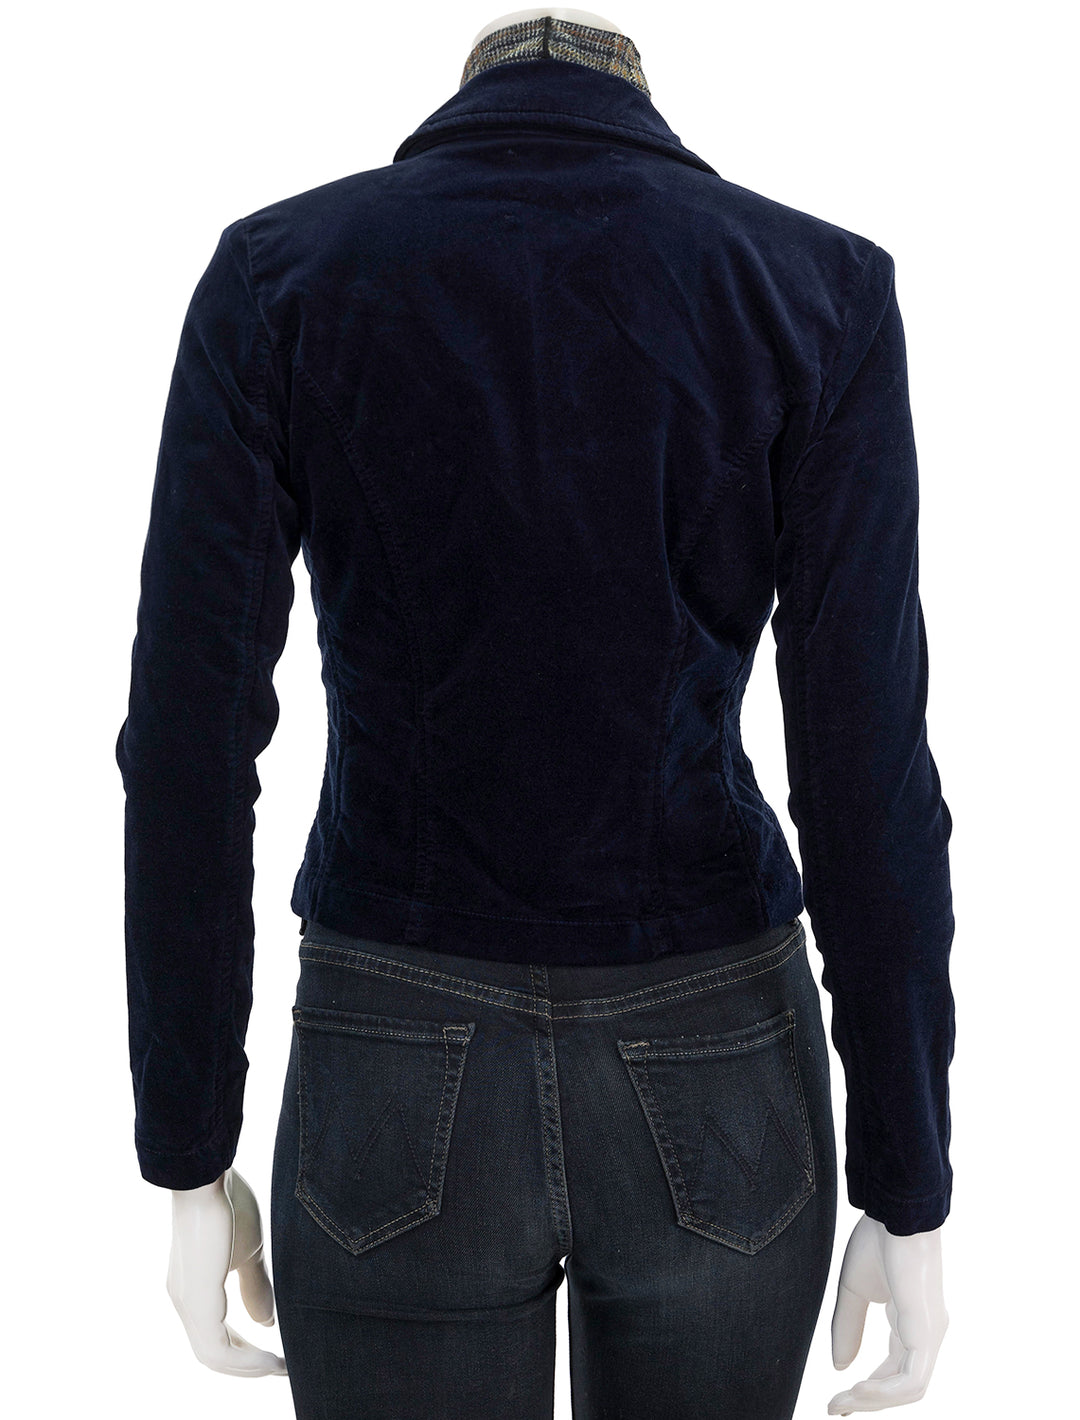 Back view of L'agence's wayne crop double breasted jacket in dark navy velvet.